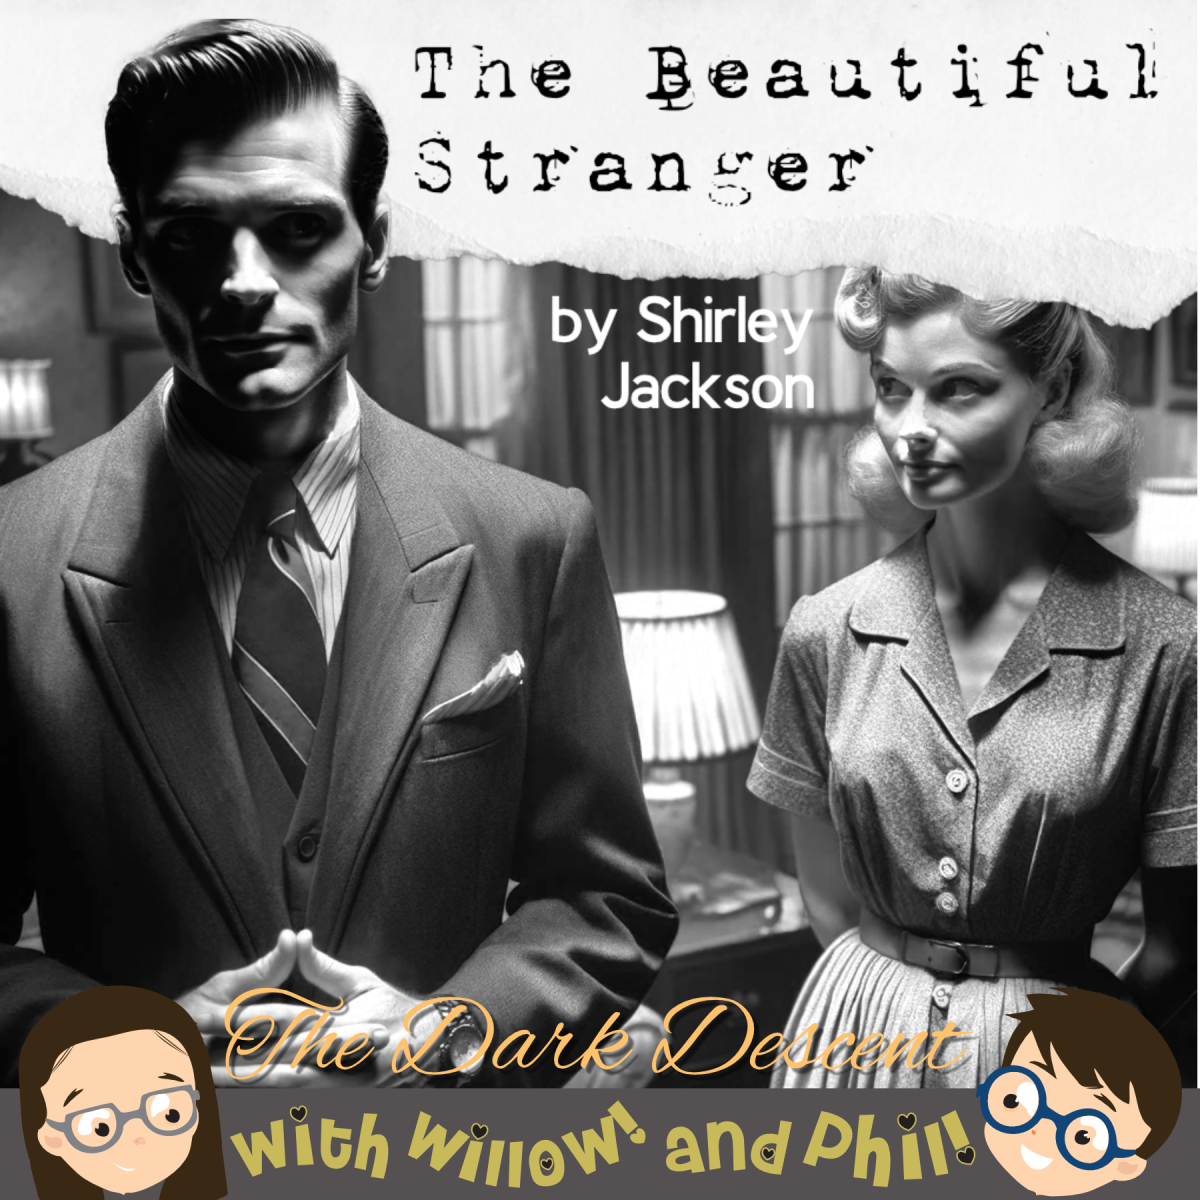 The Dark Descent – “The Beautiful Stranger” by Shirley Jackson